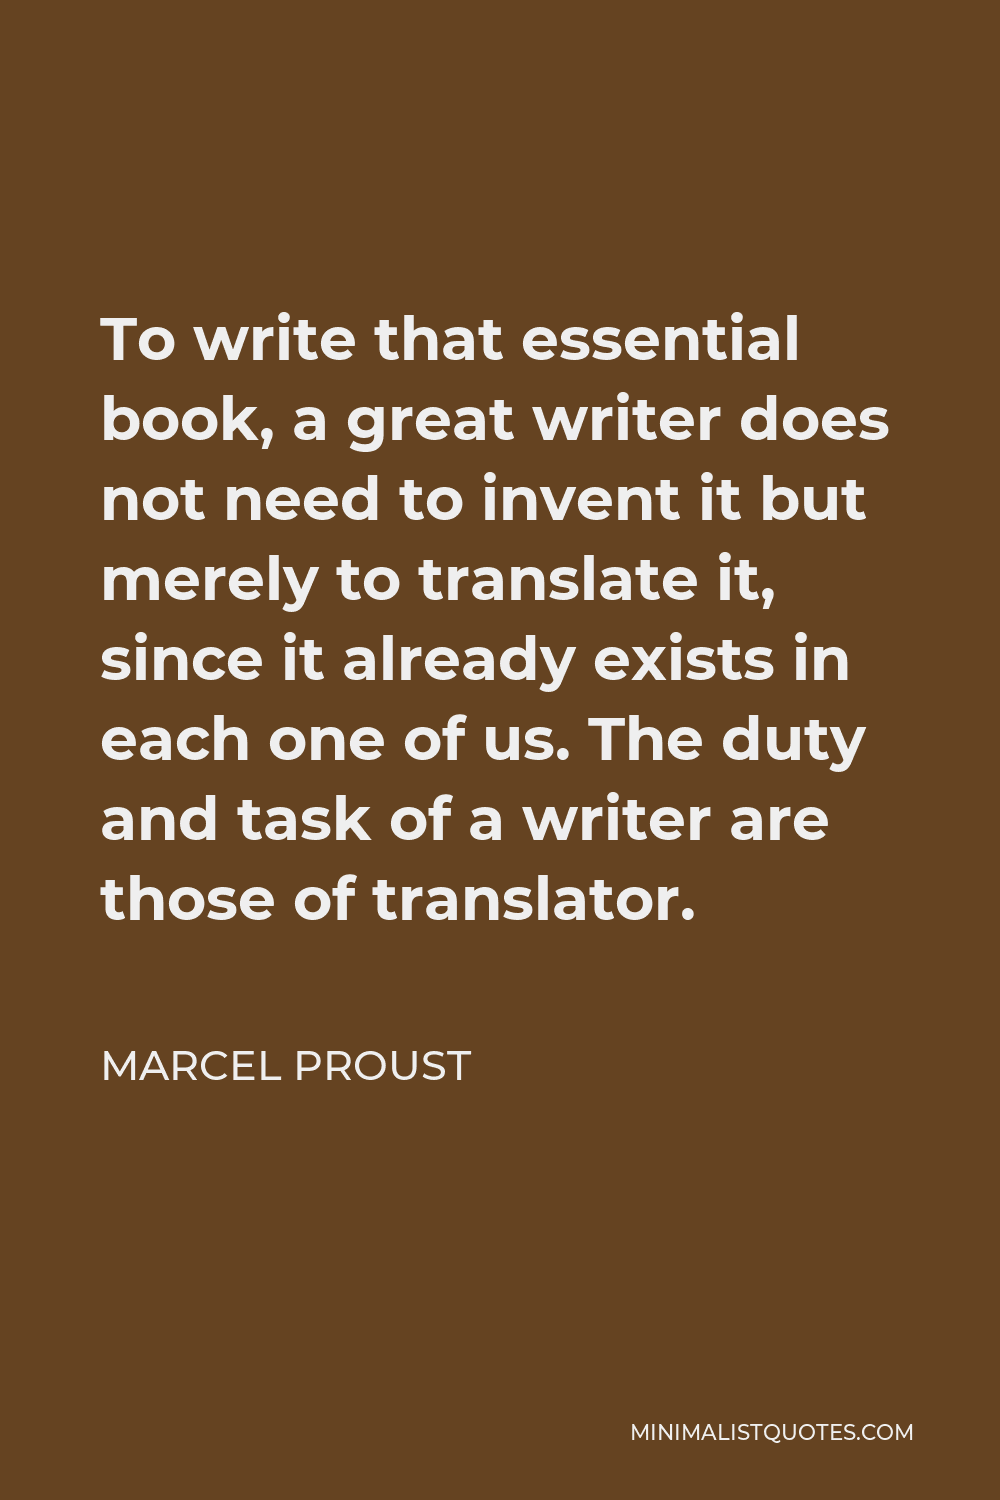 Marcel Proust Quote - To write that essential book, a great writer does not need to invent it but merely to translate it, since it already exists in each one of us. The duty and task of a writer are those of translator.